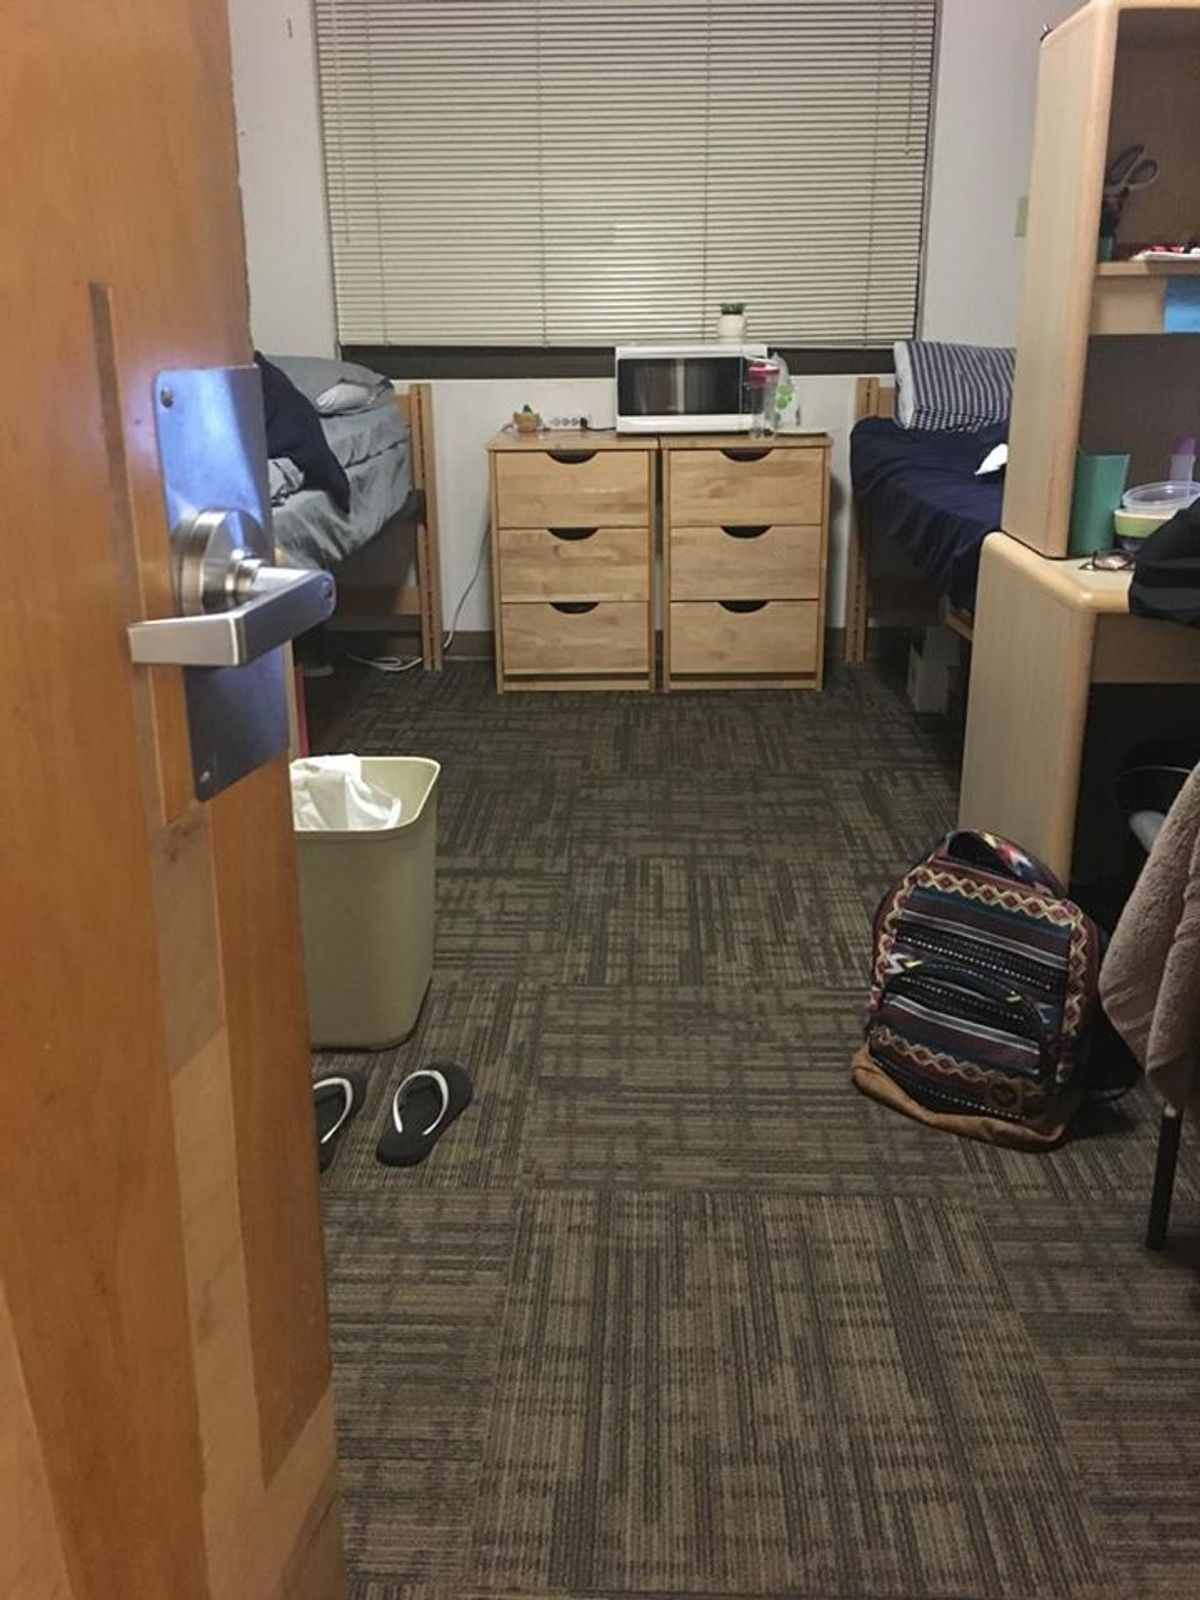 What They Don't Tell You About Living In the Dorms